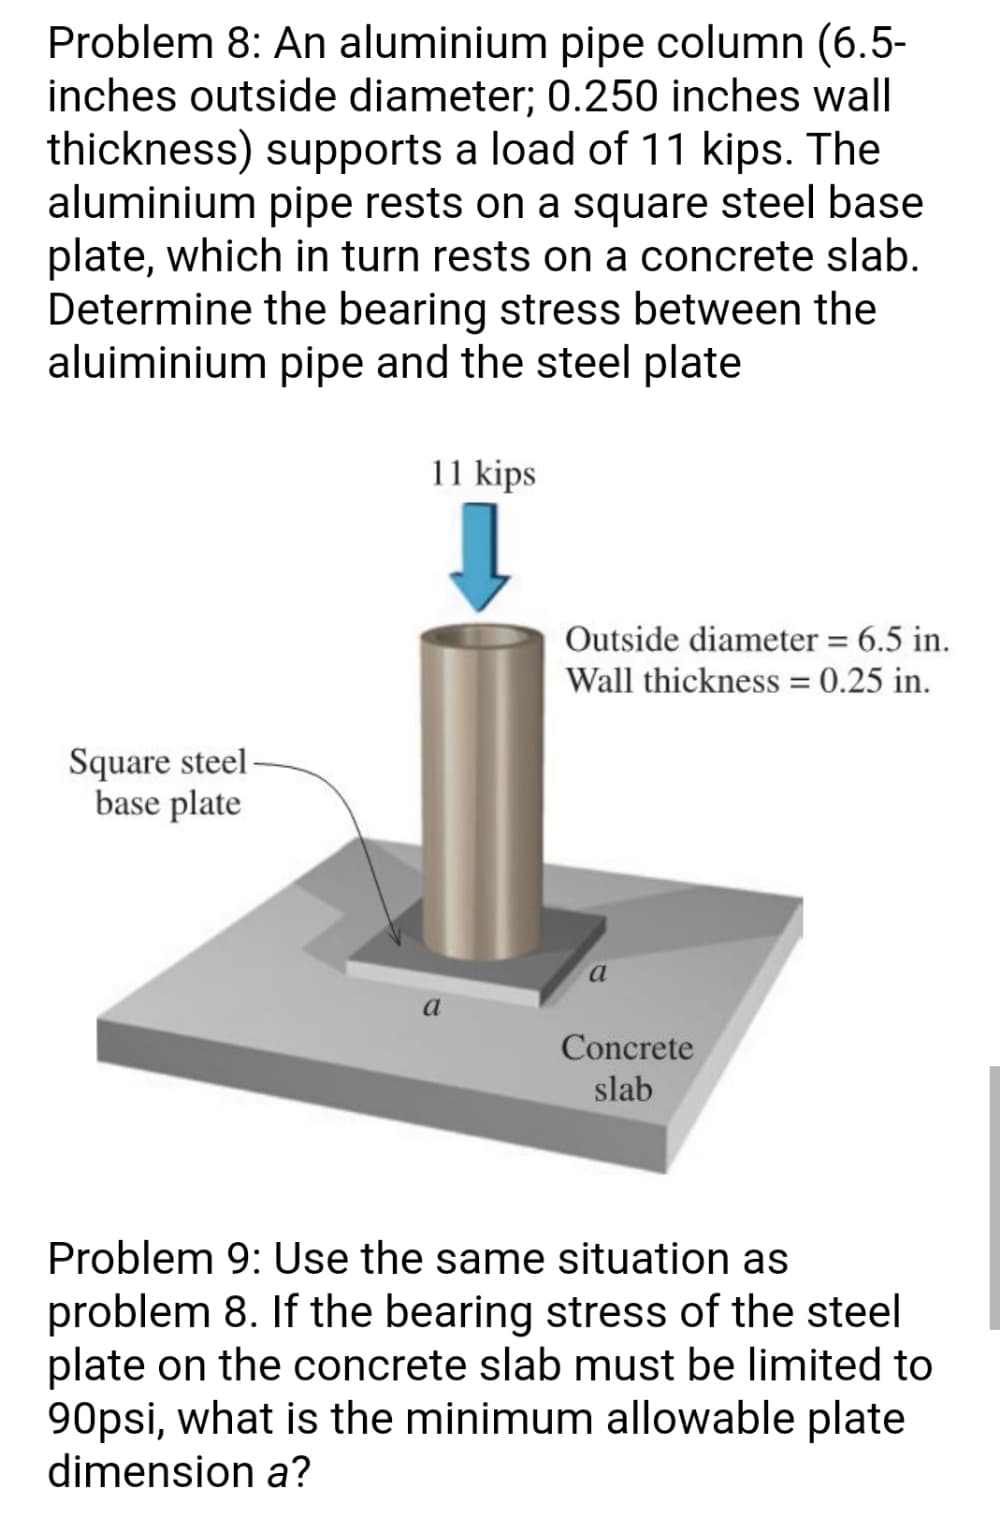 Problem 8: An aluminium pipe column (6.5-
inches outside diameter; 0.250 inches wall
thickness) supports a load of 11 kips. The
aluminium pipe rests on a square steel base
plate, which in turn rests on a concrete slab.
Determine the bearing stress between the
aluiminium pipe and the steel plate
11 kips
Outside diameter = 6.5 in.
Wall thickness = 0.25 in.
Square steel-
base plate
a
a
Concrete
slab
Problem 9: Use the same situation as
problem 8. If the bearing stress of the steel
plate on the concrete slab must be limited to
90psi, what is the minimum allowable plate
dimension a?
